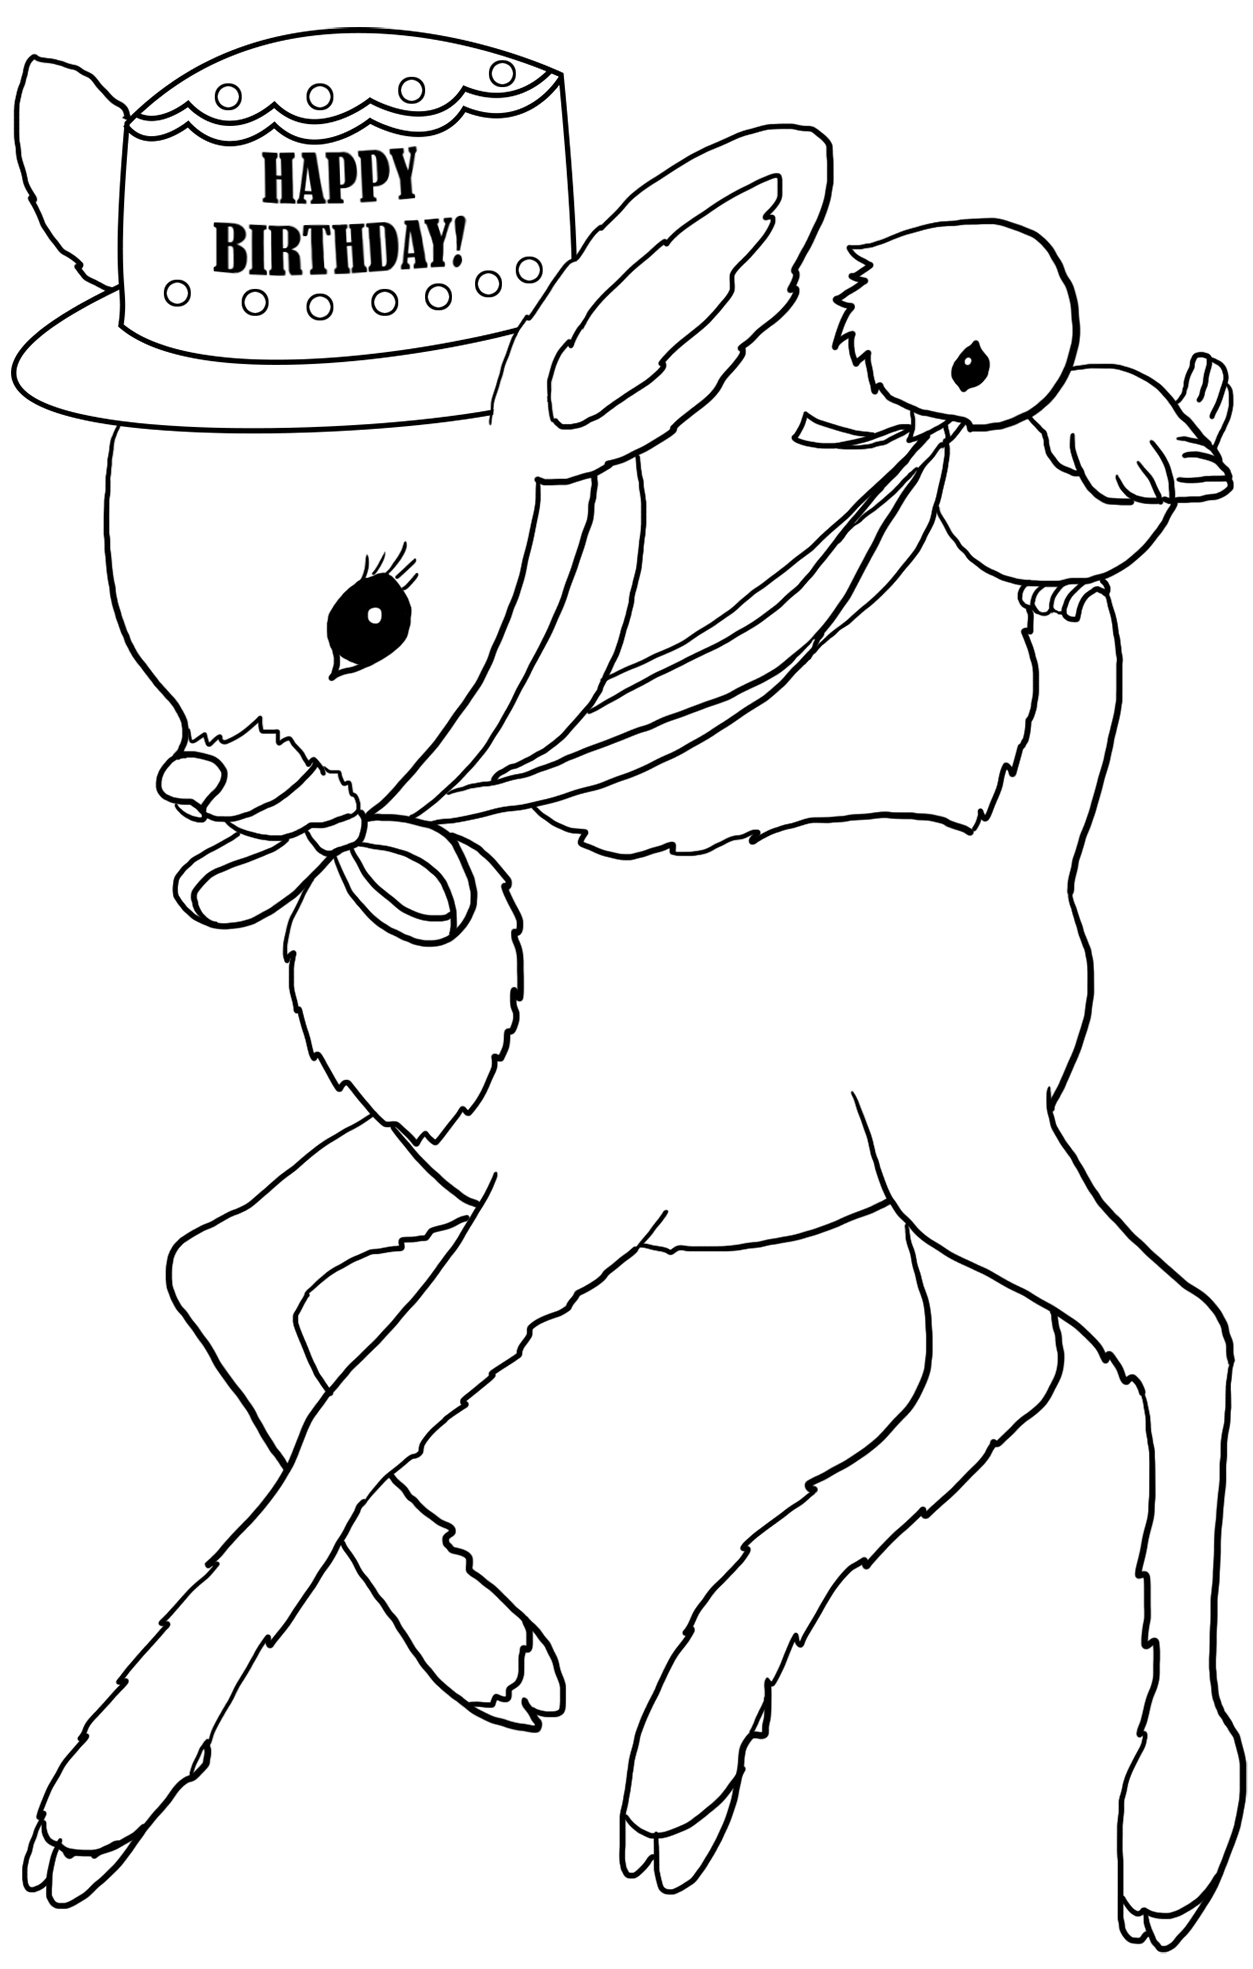 coloring sheet for birthday with bambi and bird